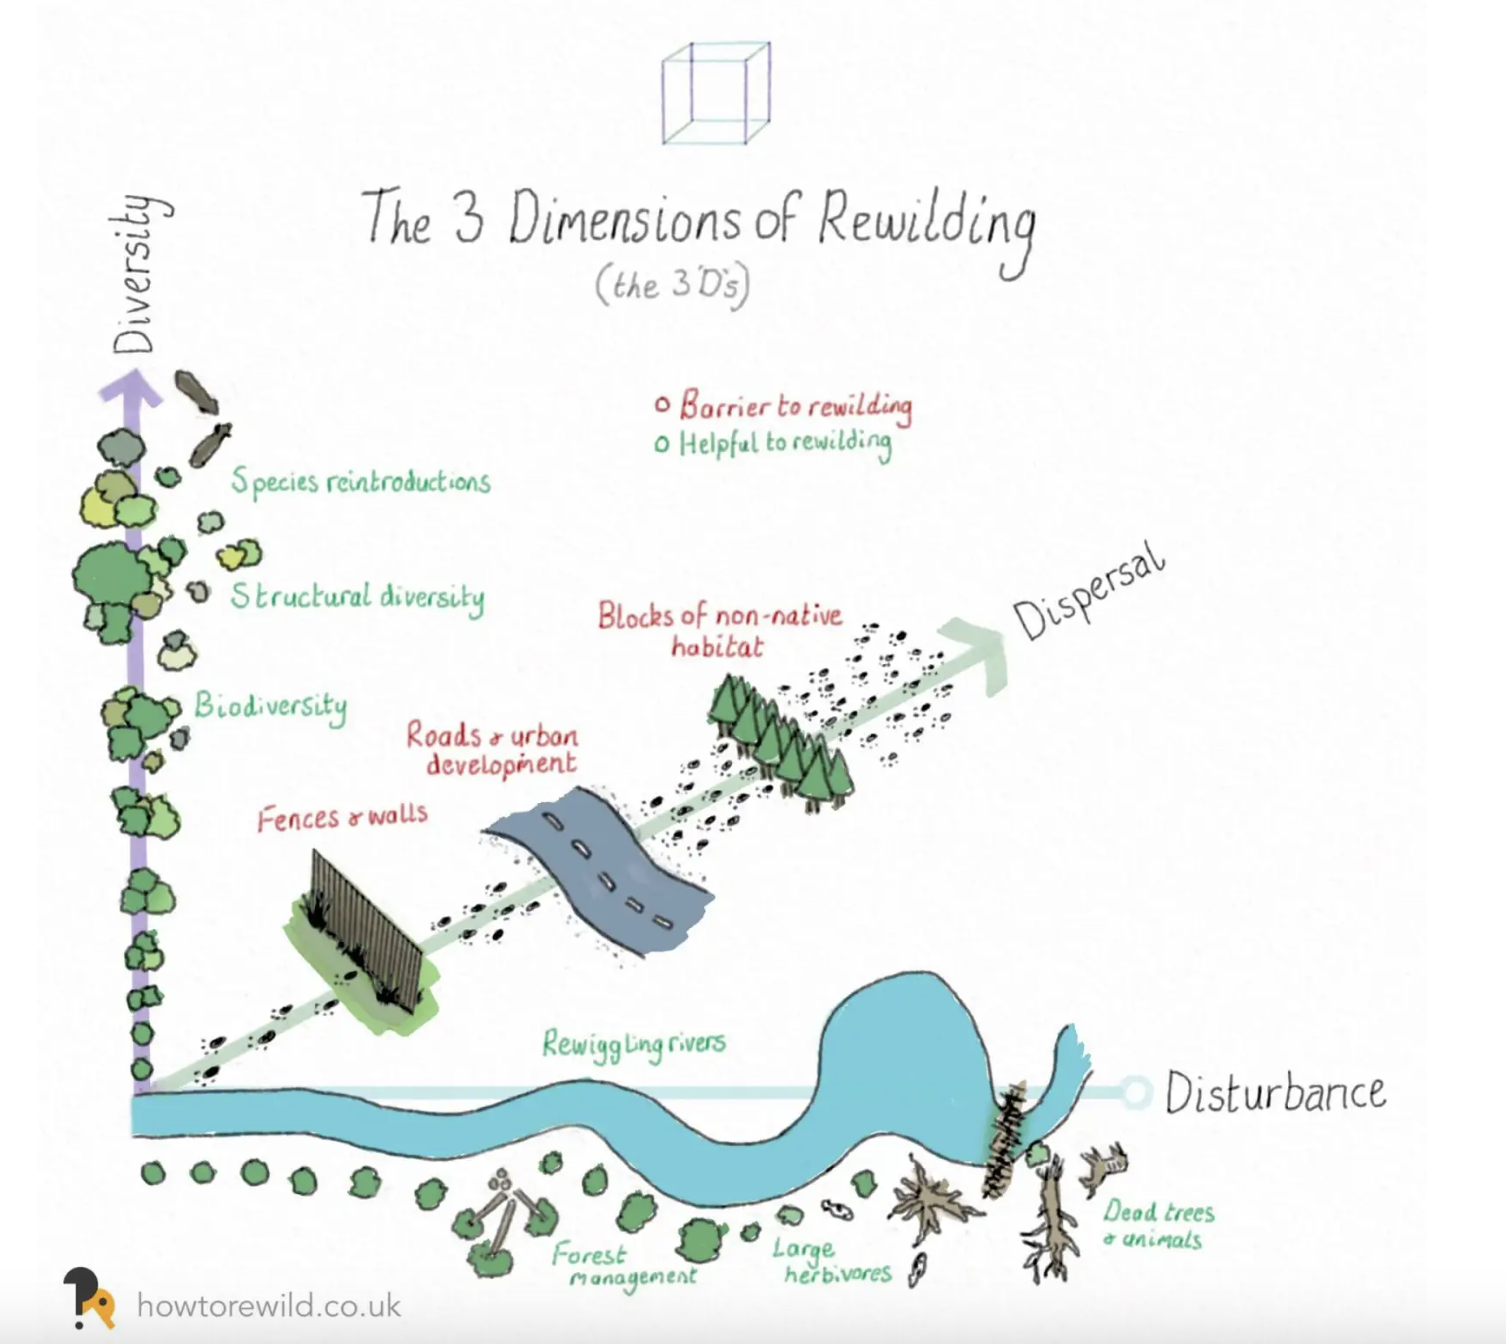 The image shows the 3 dimensions of european rewilding.